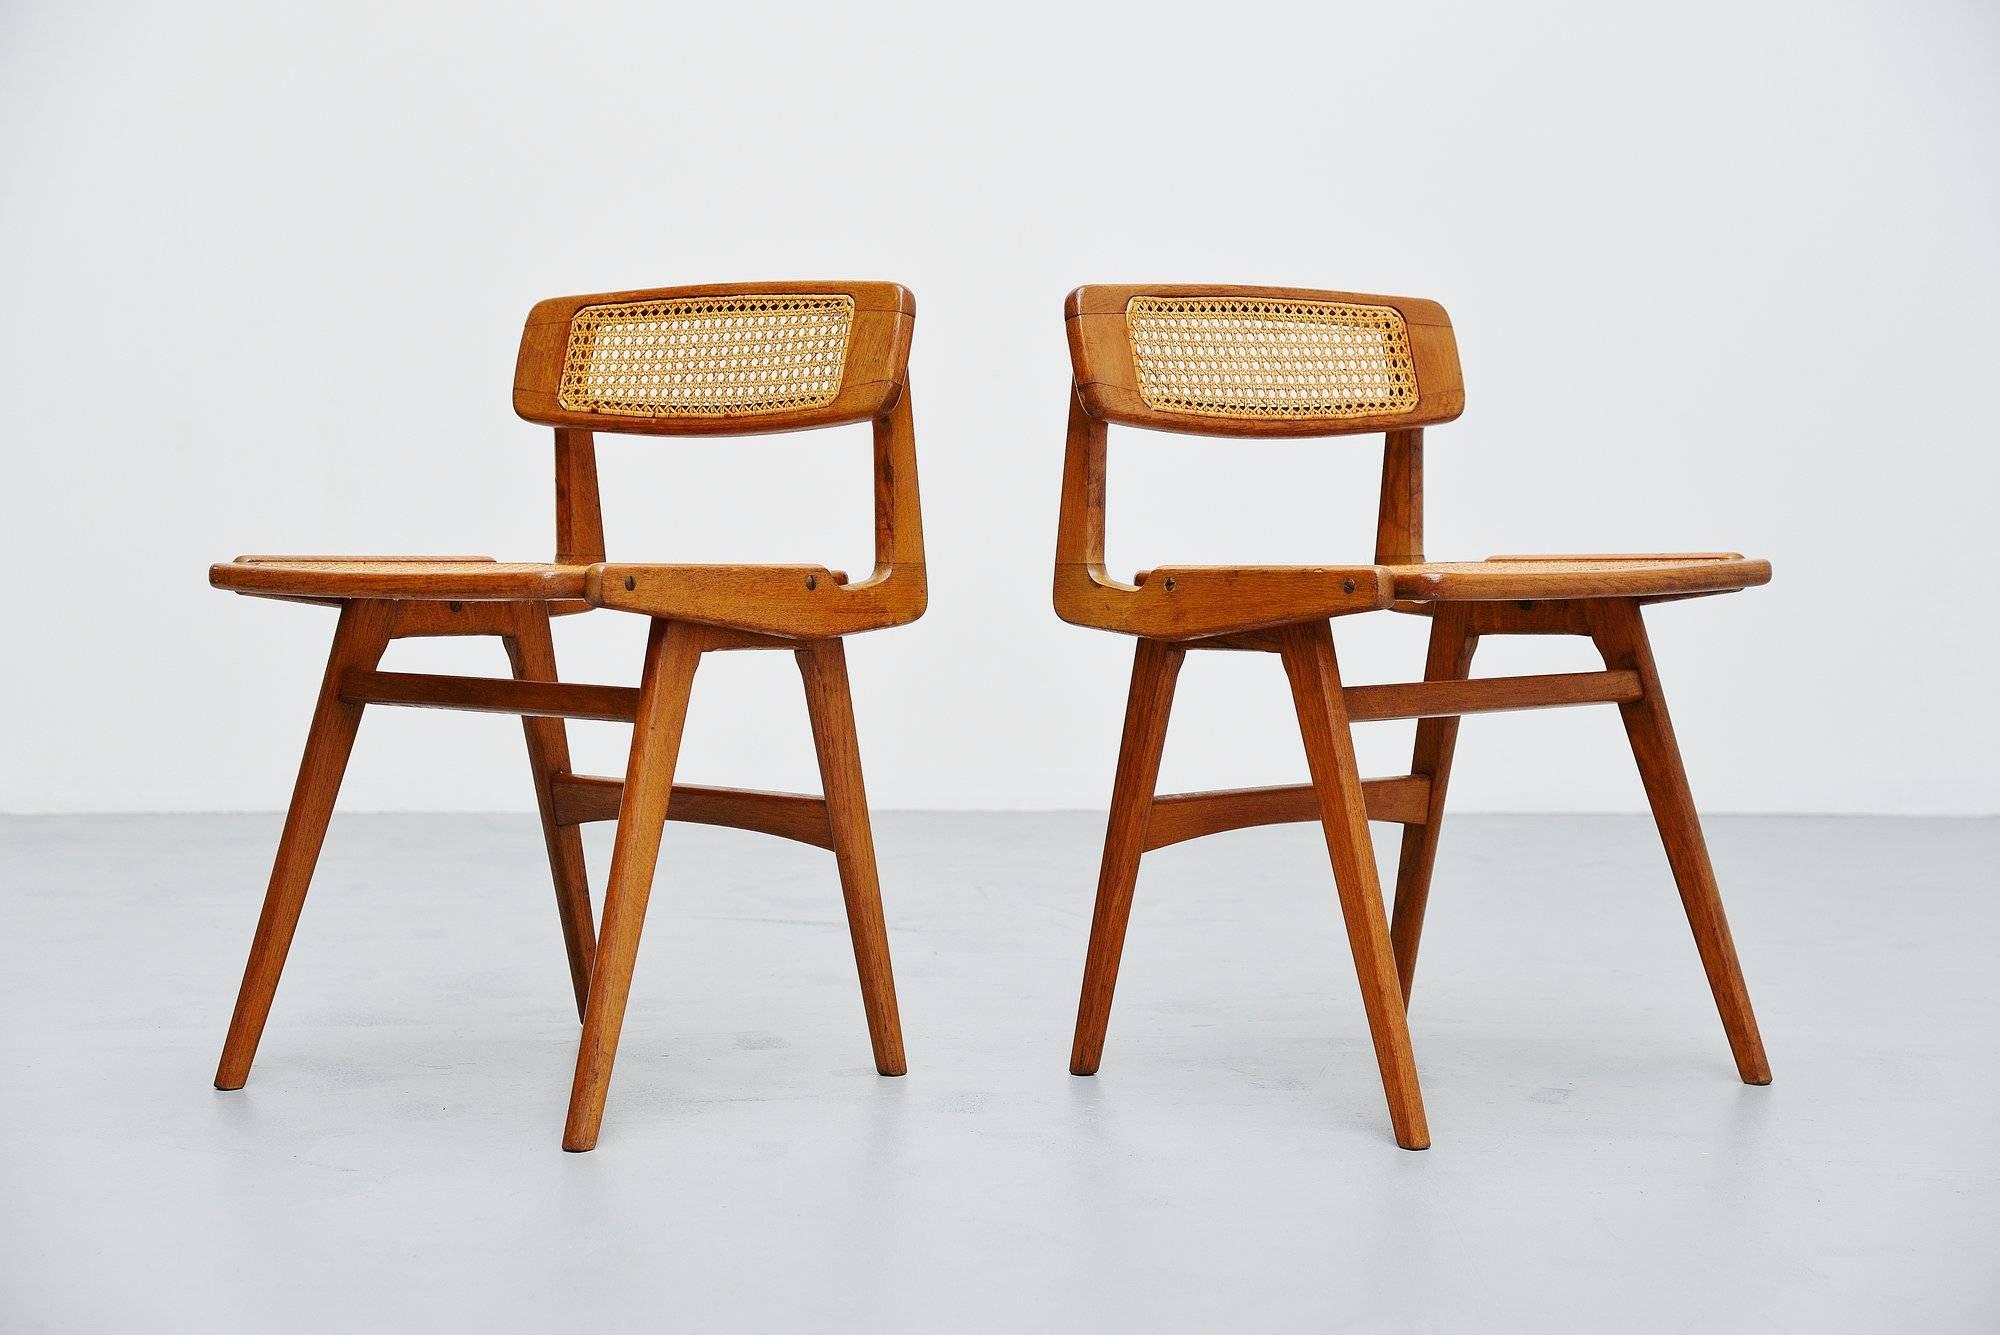 Pair of forme libre side chairs designed and manufactured by Roger Landault, France 1952. These chairs are made of solid oak and have a cane woven seat and back. The chairs are close to several designs by Charlotte Perriand and Pierre Chapo. They